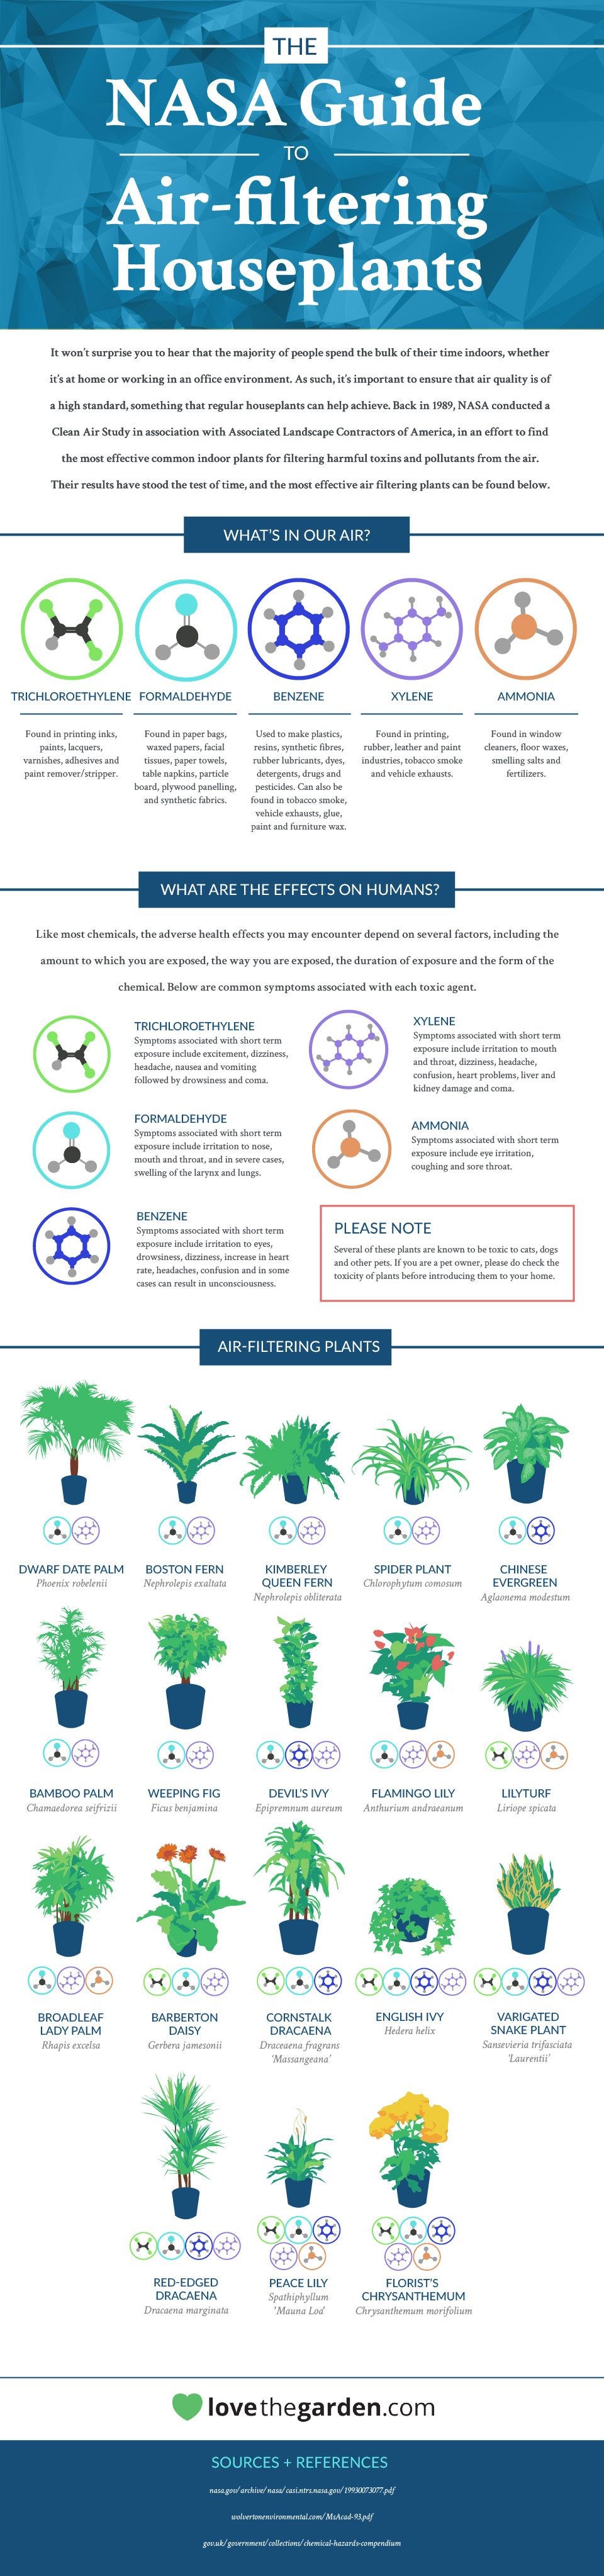 NASAâ€™s guide to the best air-filtering plants to have in your home